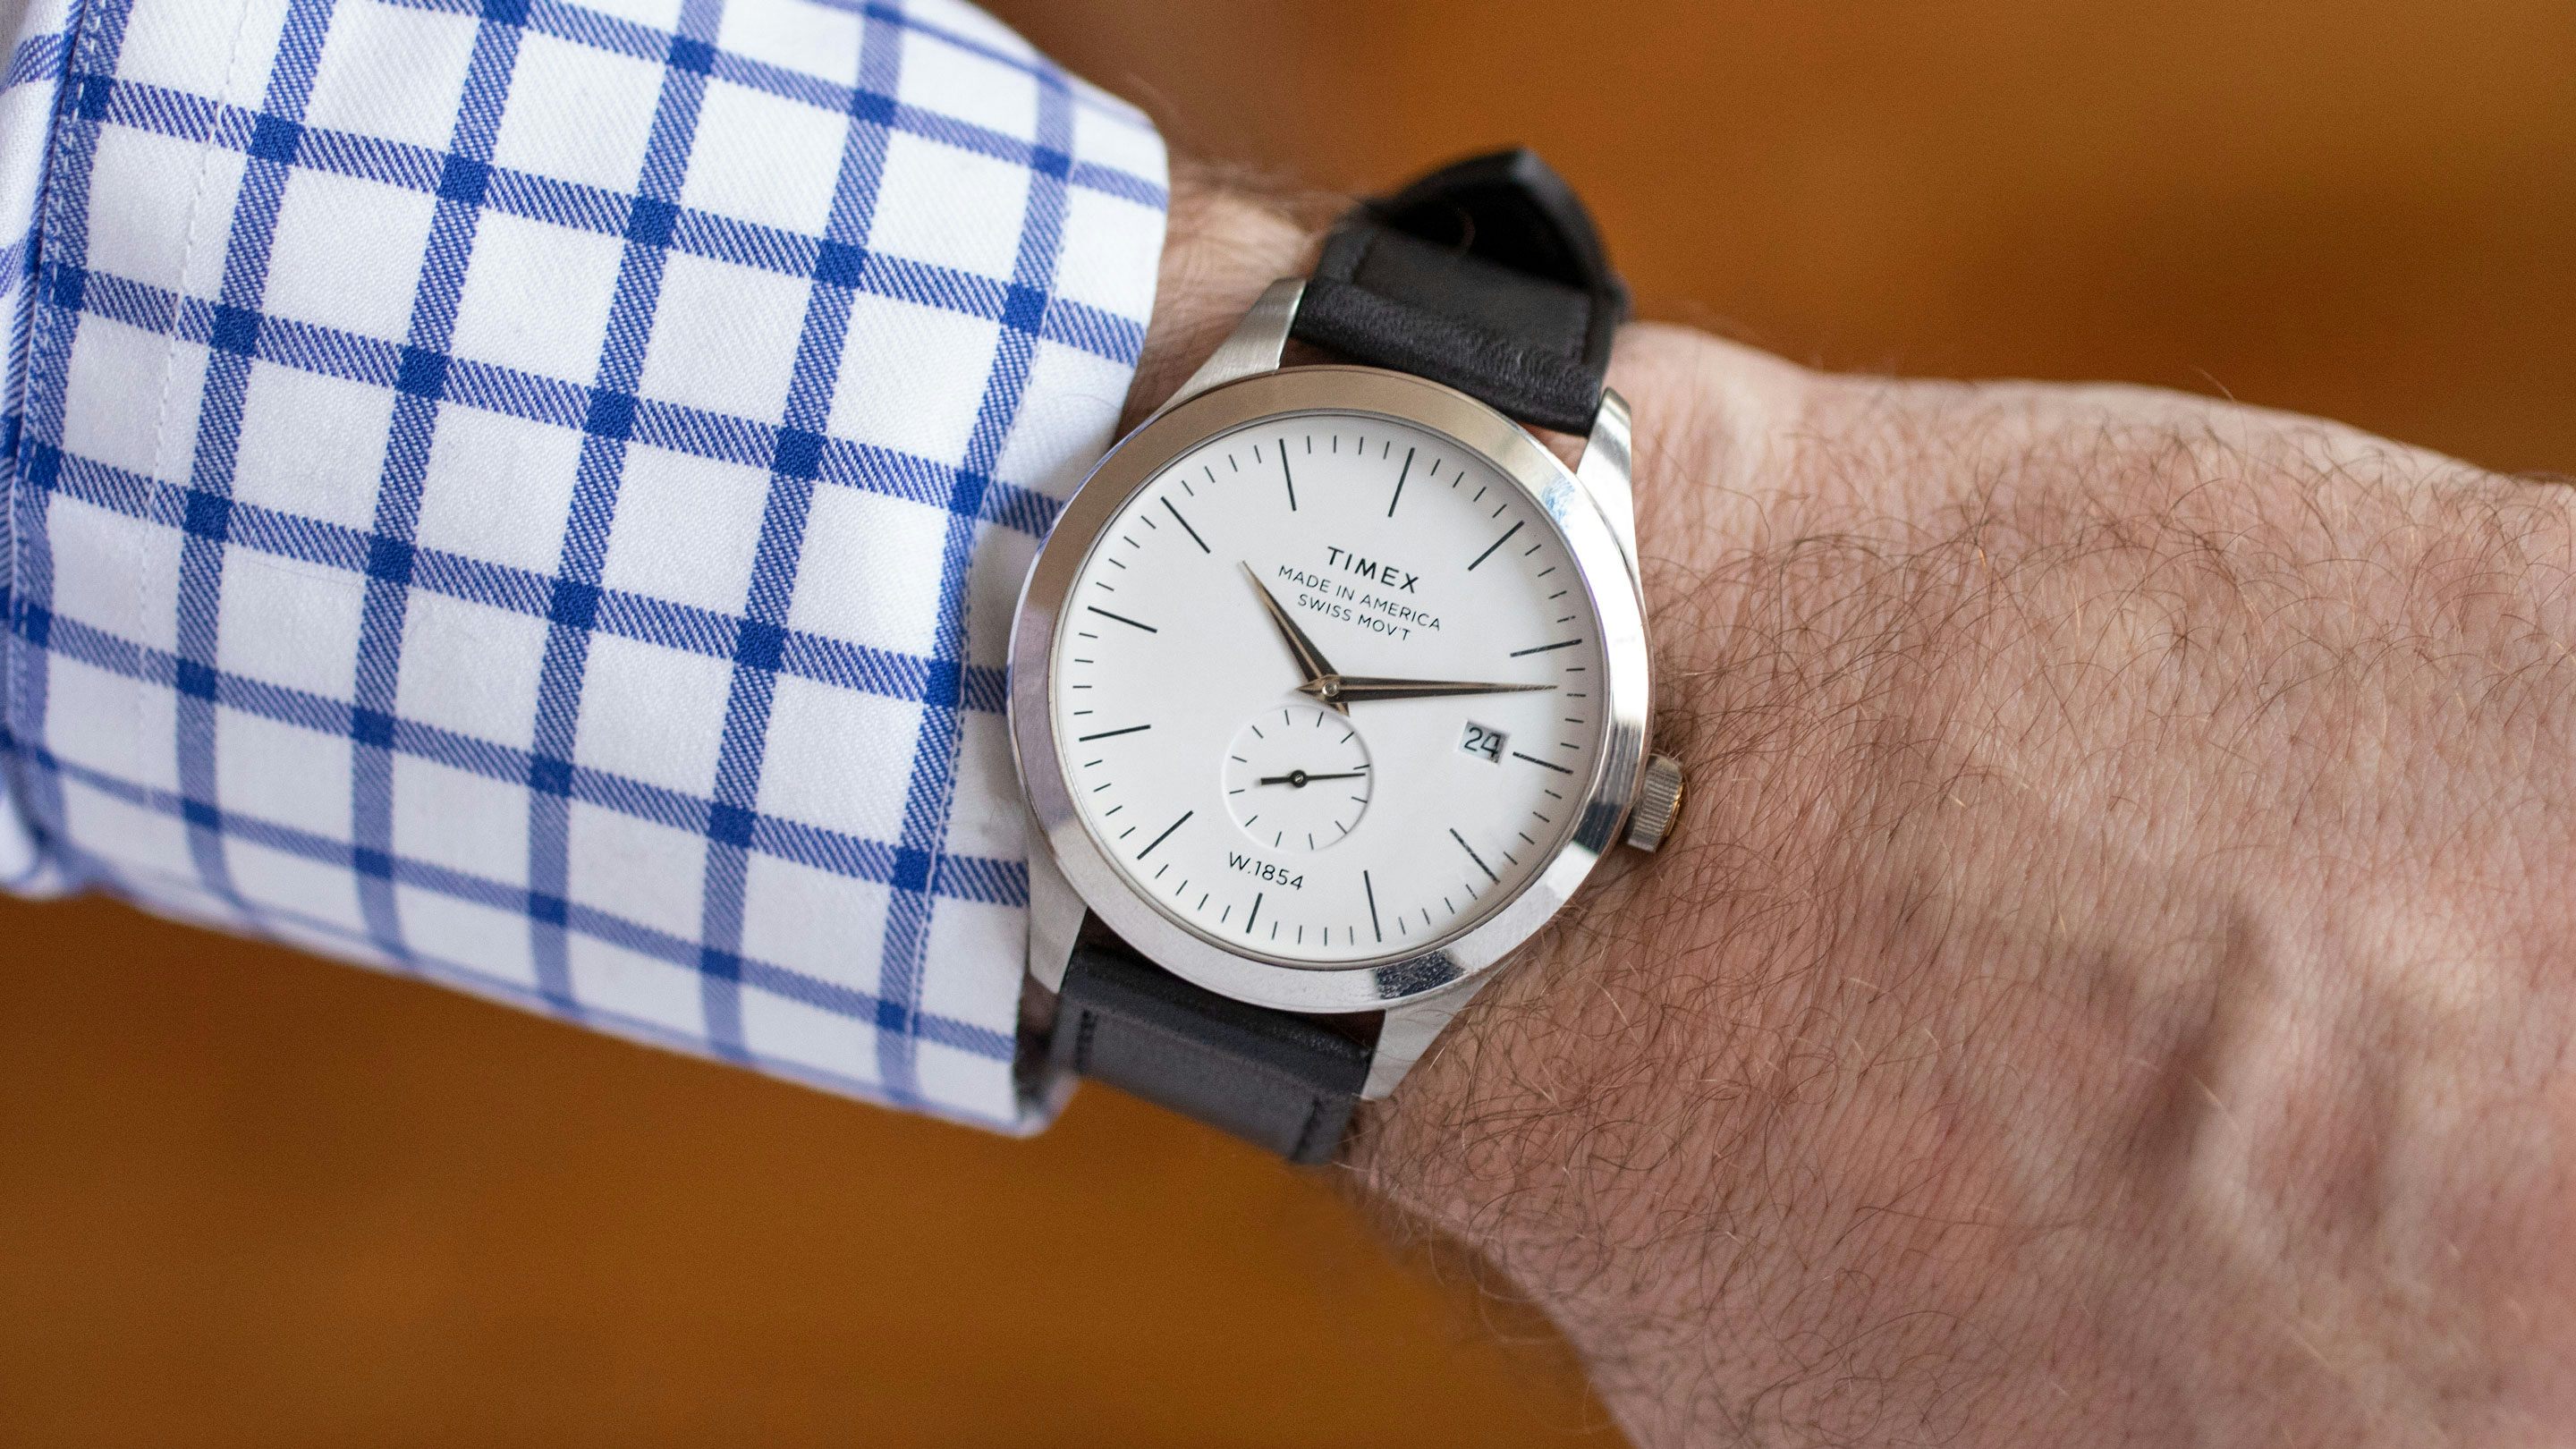 Introducing: The Timex American Documents Series - Hodinkee